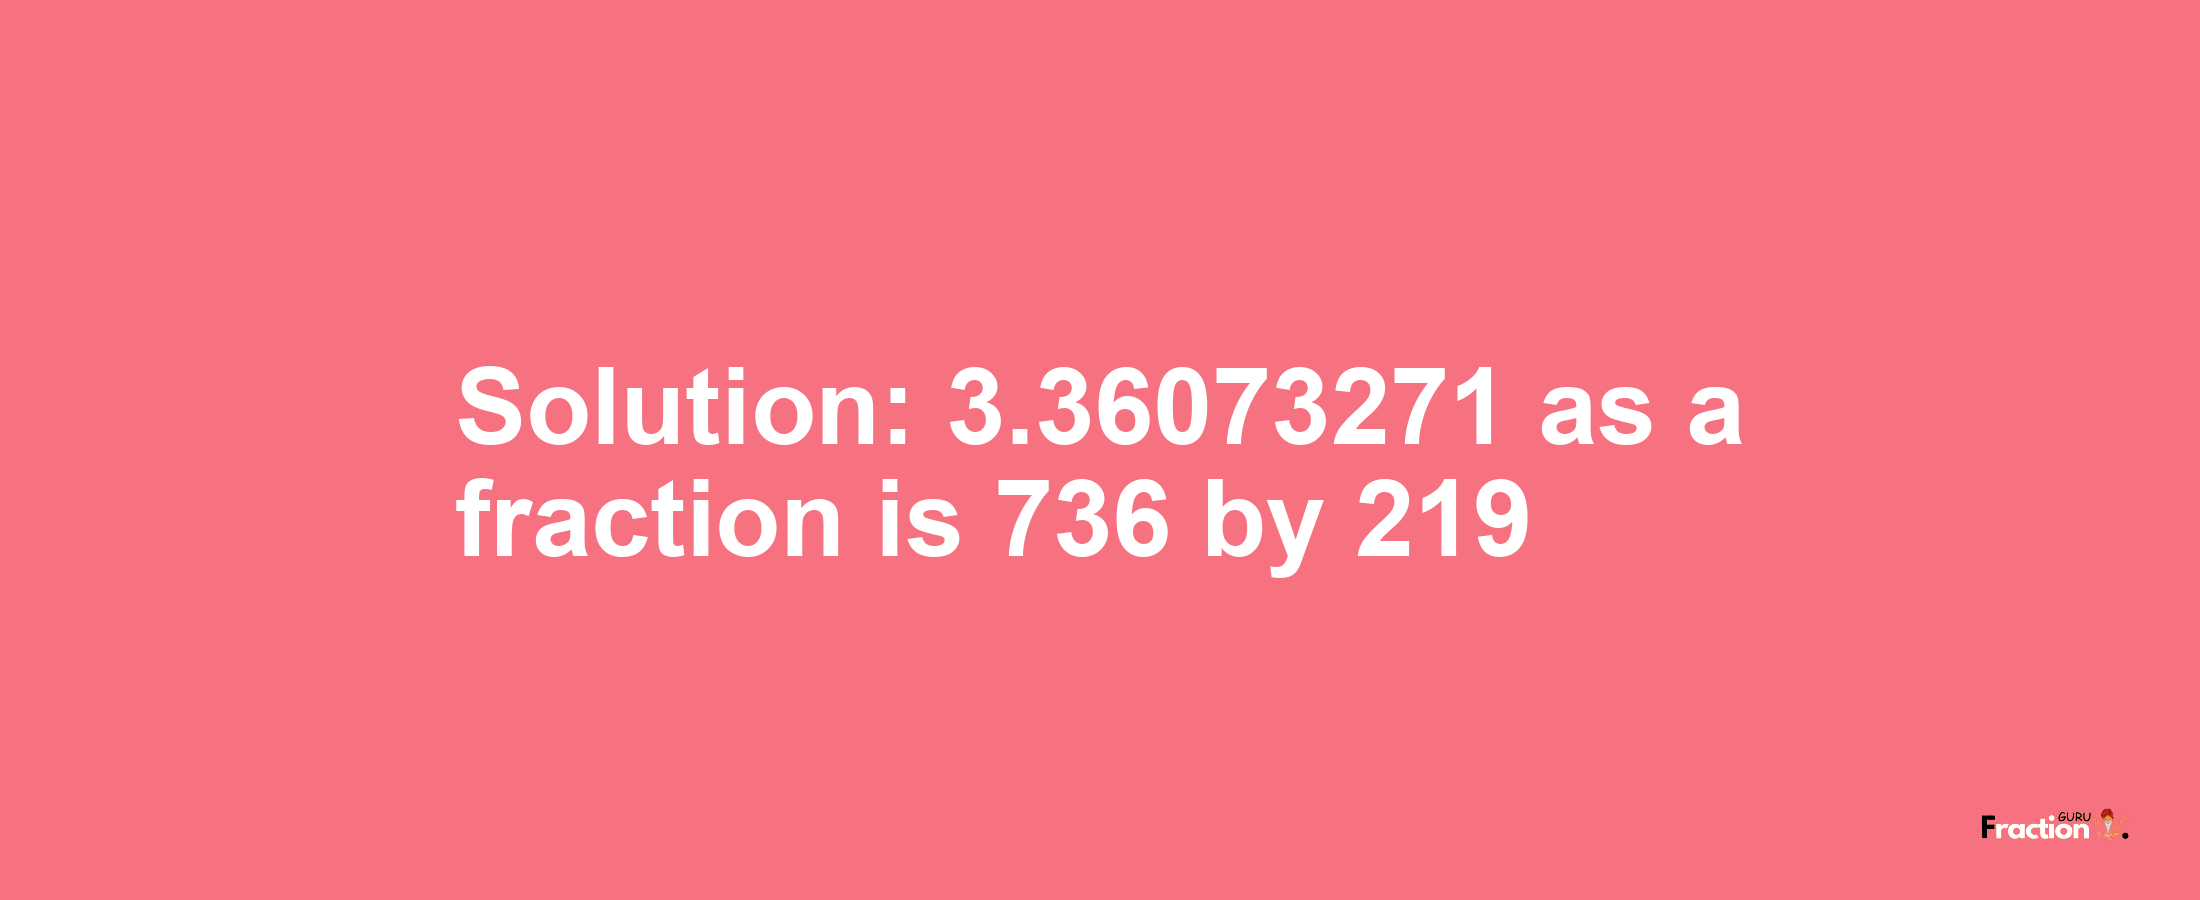 Solution:3.36073271 as a fraction is 736/219